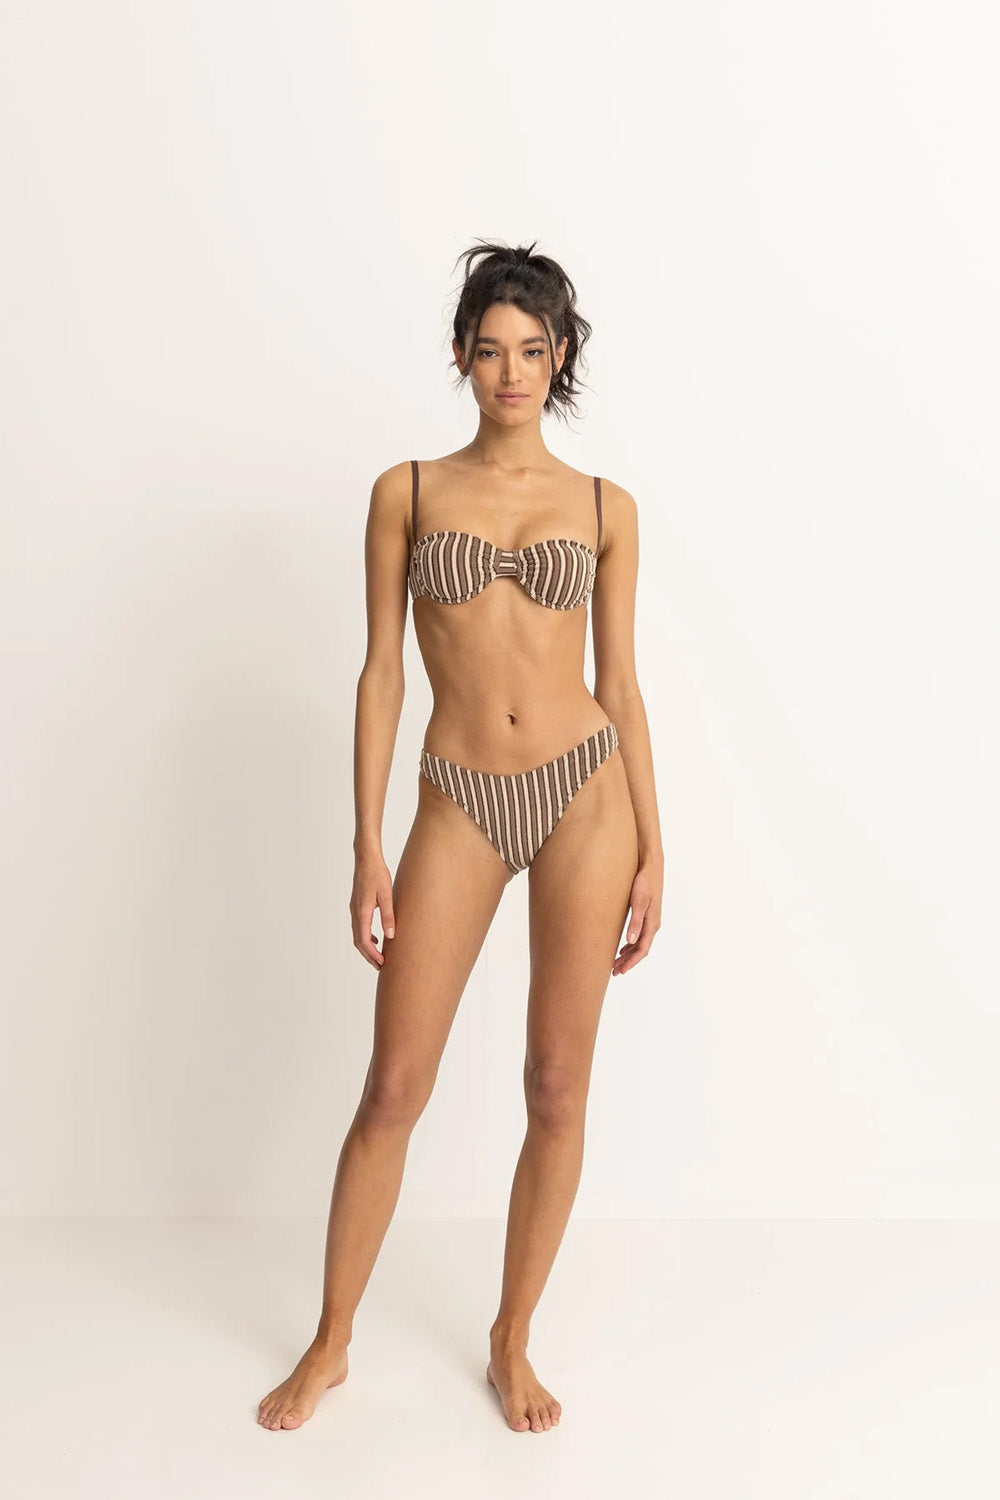 Rhythm - Terry Sands Stripe Underwire Top - Cocoa